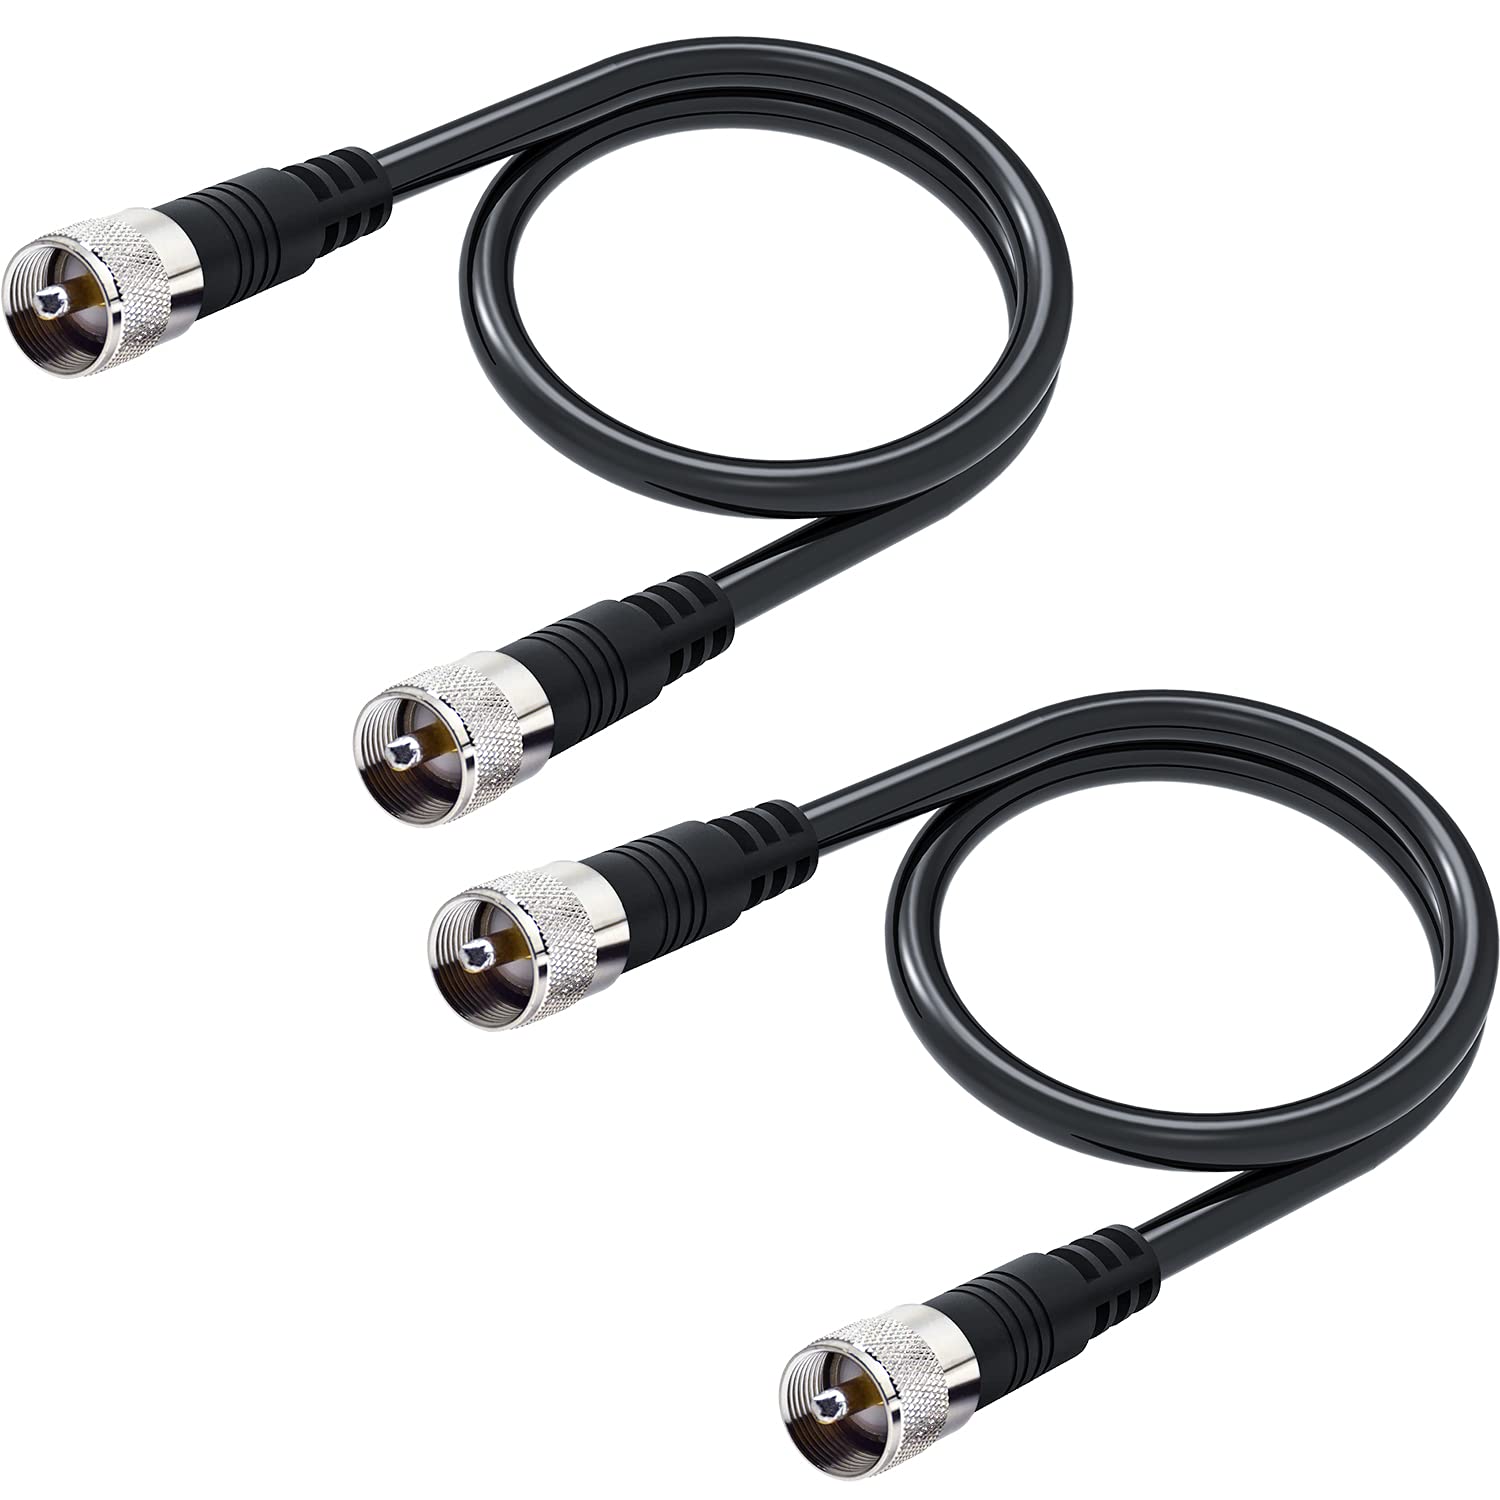 RG8x Jumper Cable, 2 Pack 2ft CB Coax Cable PL259 UHF [...]